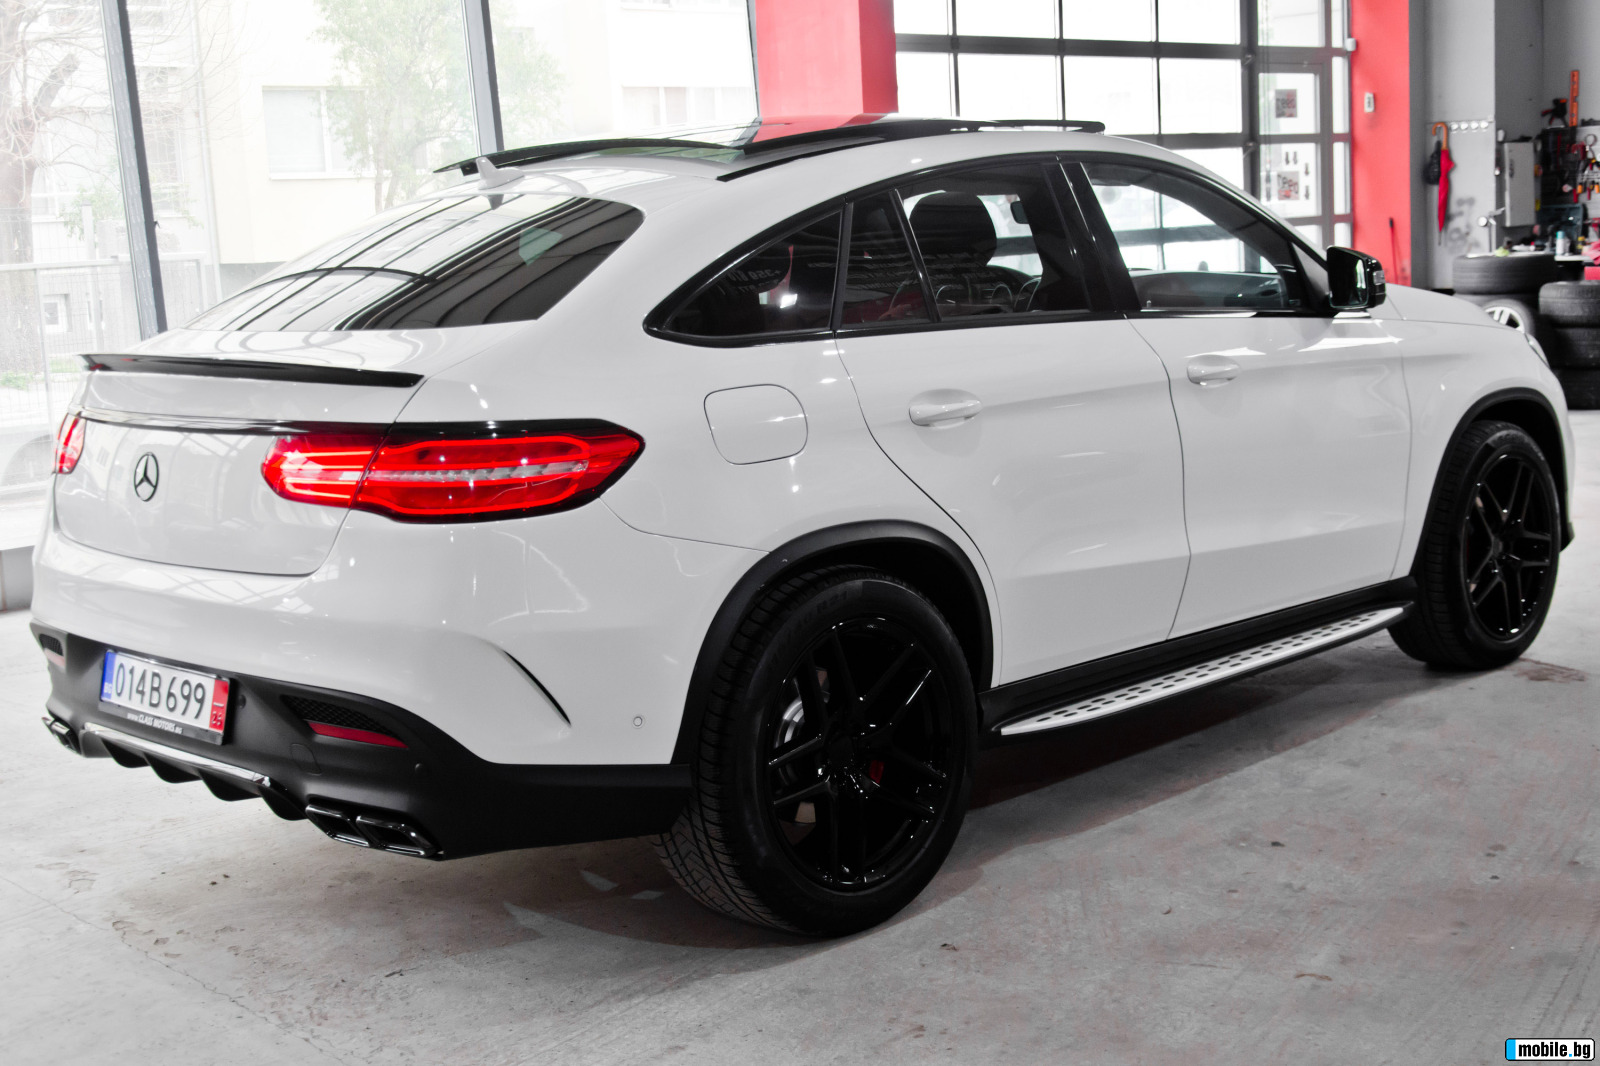 Mercedes-Benz GLE Coupe 350d *AMG* | Mobile.bg   5